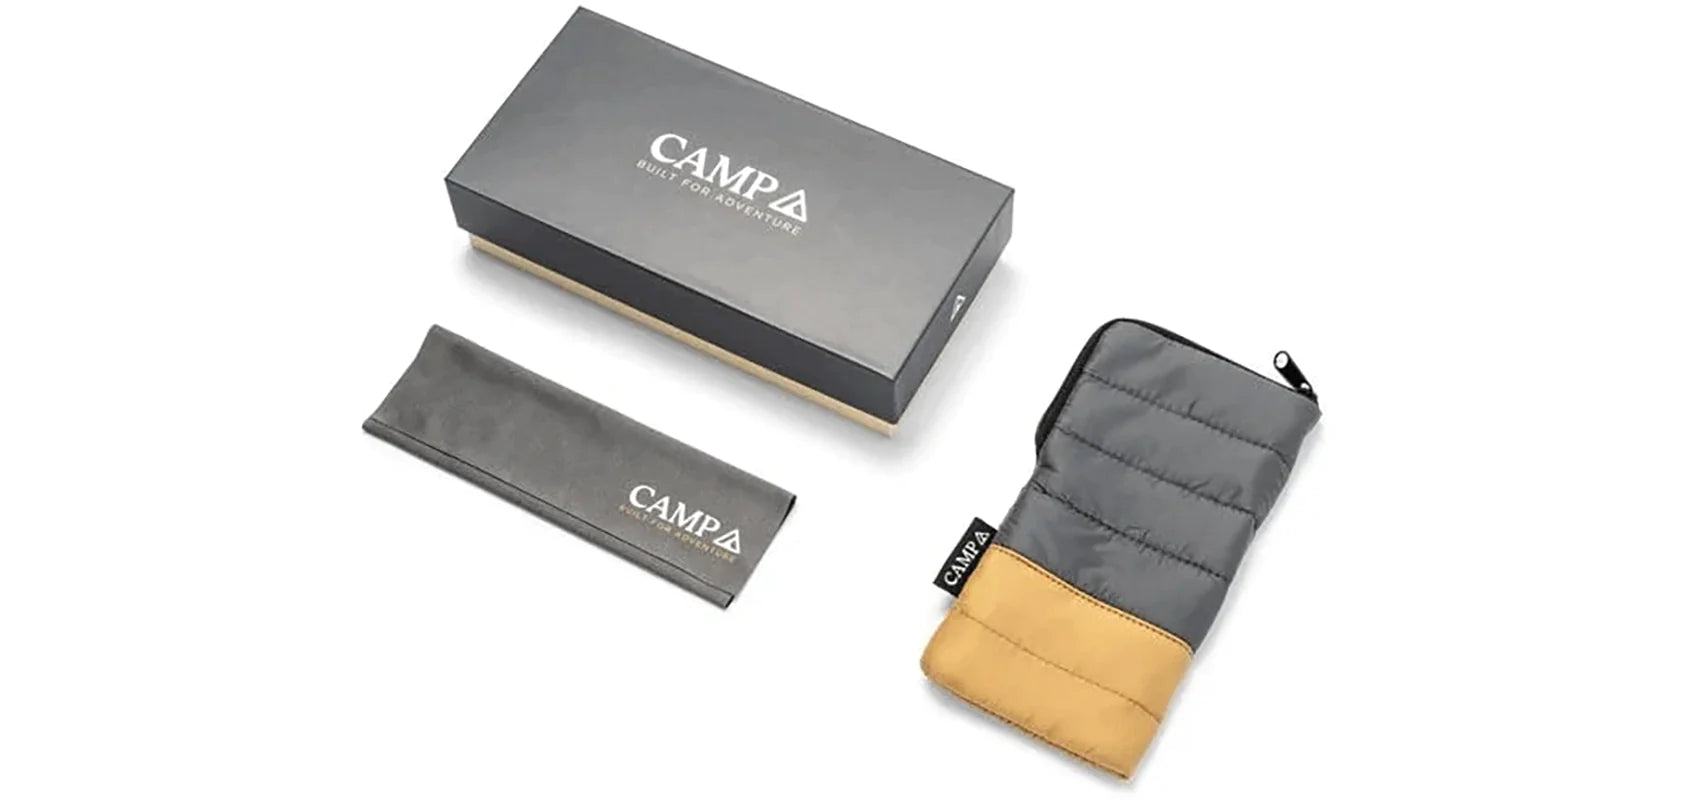 Camp sunglasses packaging with Box, pouch and cleaning cloth